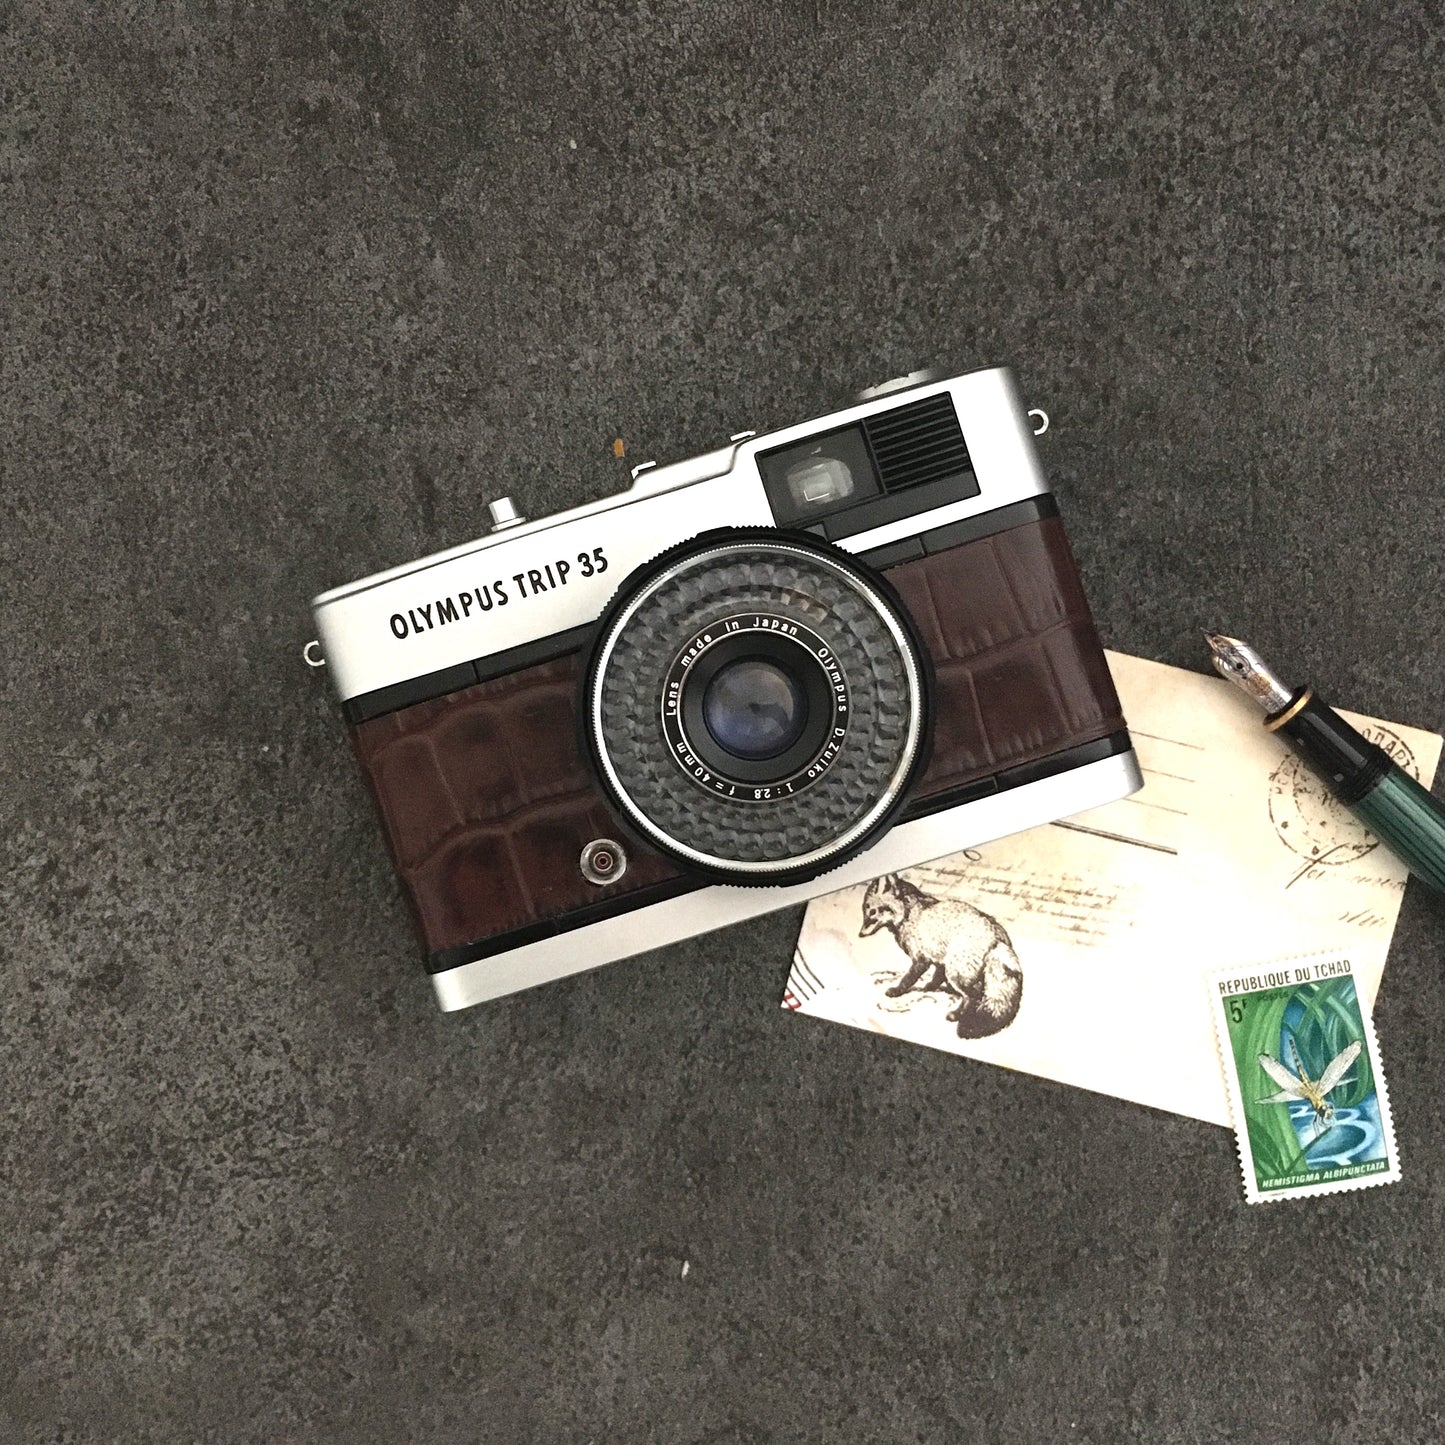 Olympus TRIP35  with crocodile stamped brown leather